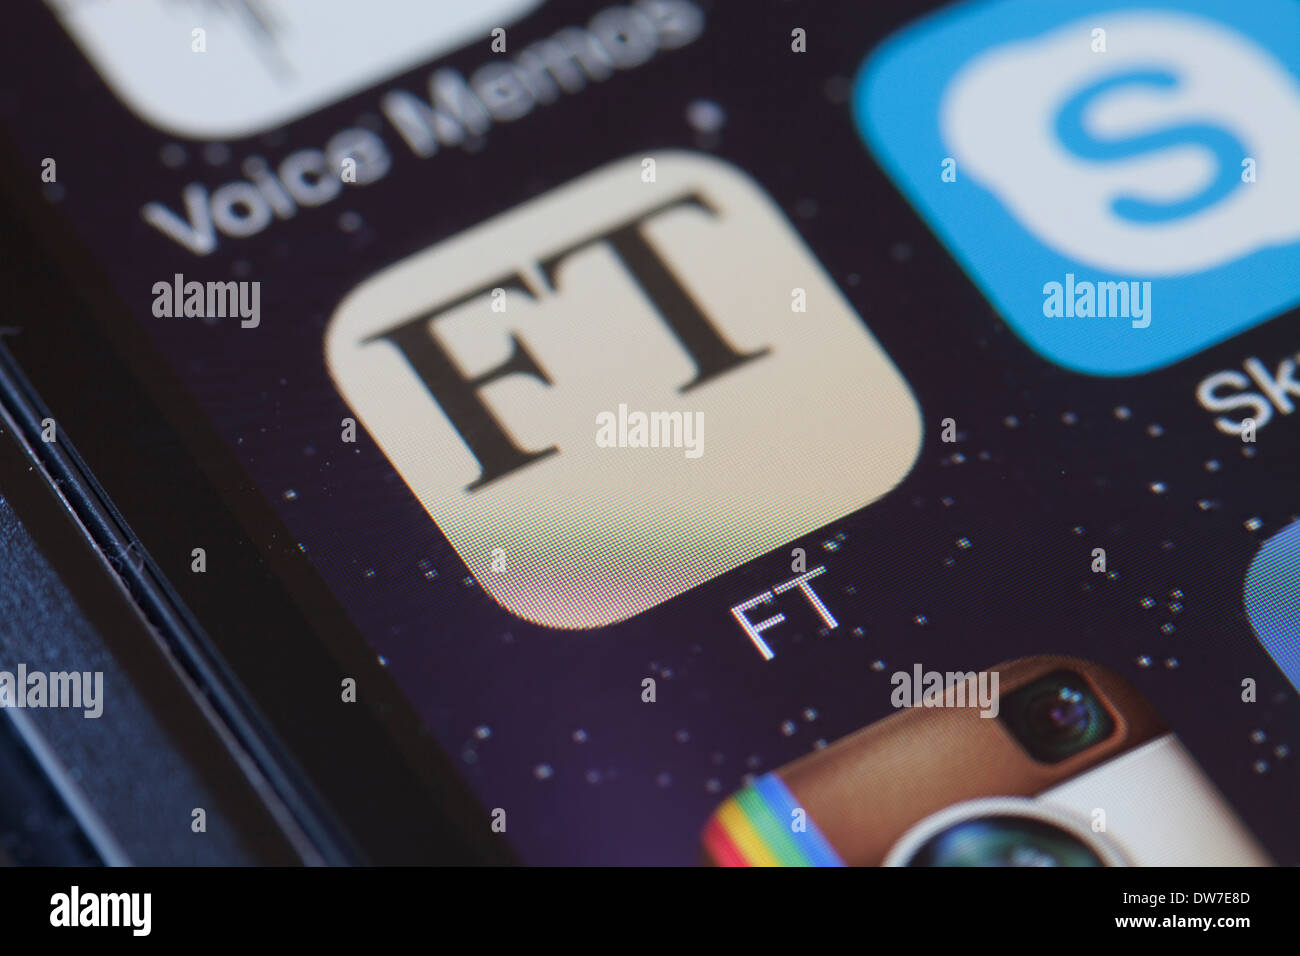 Financial Times app icon on mobile phone. Stock Photo